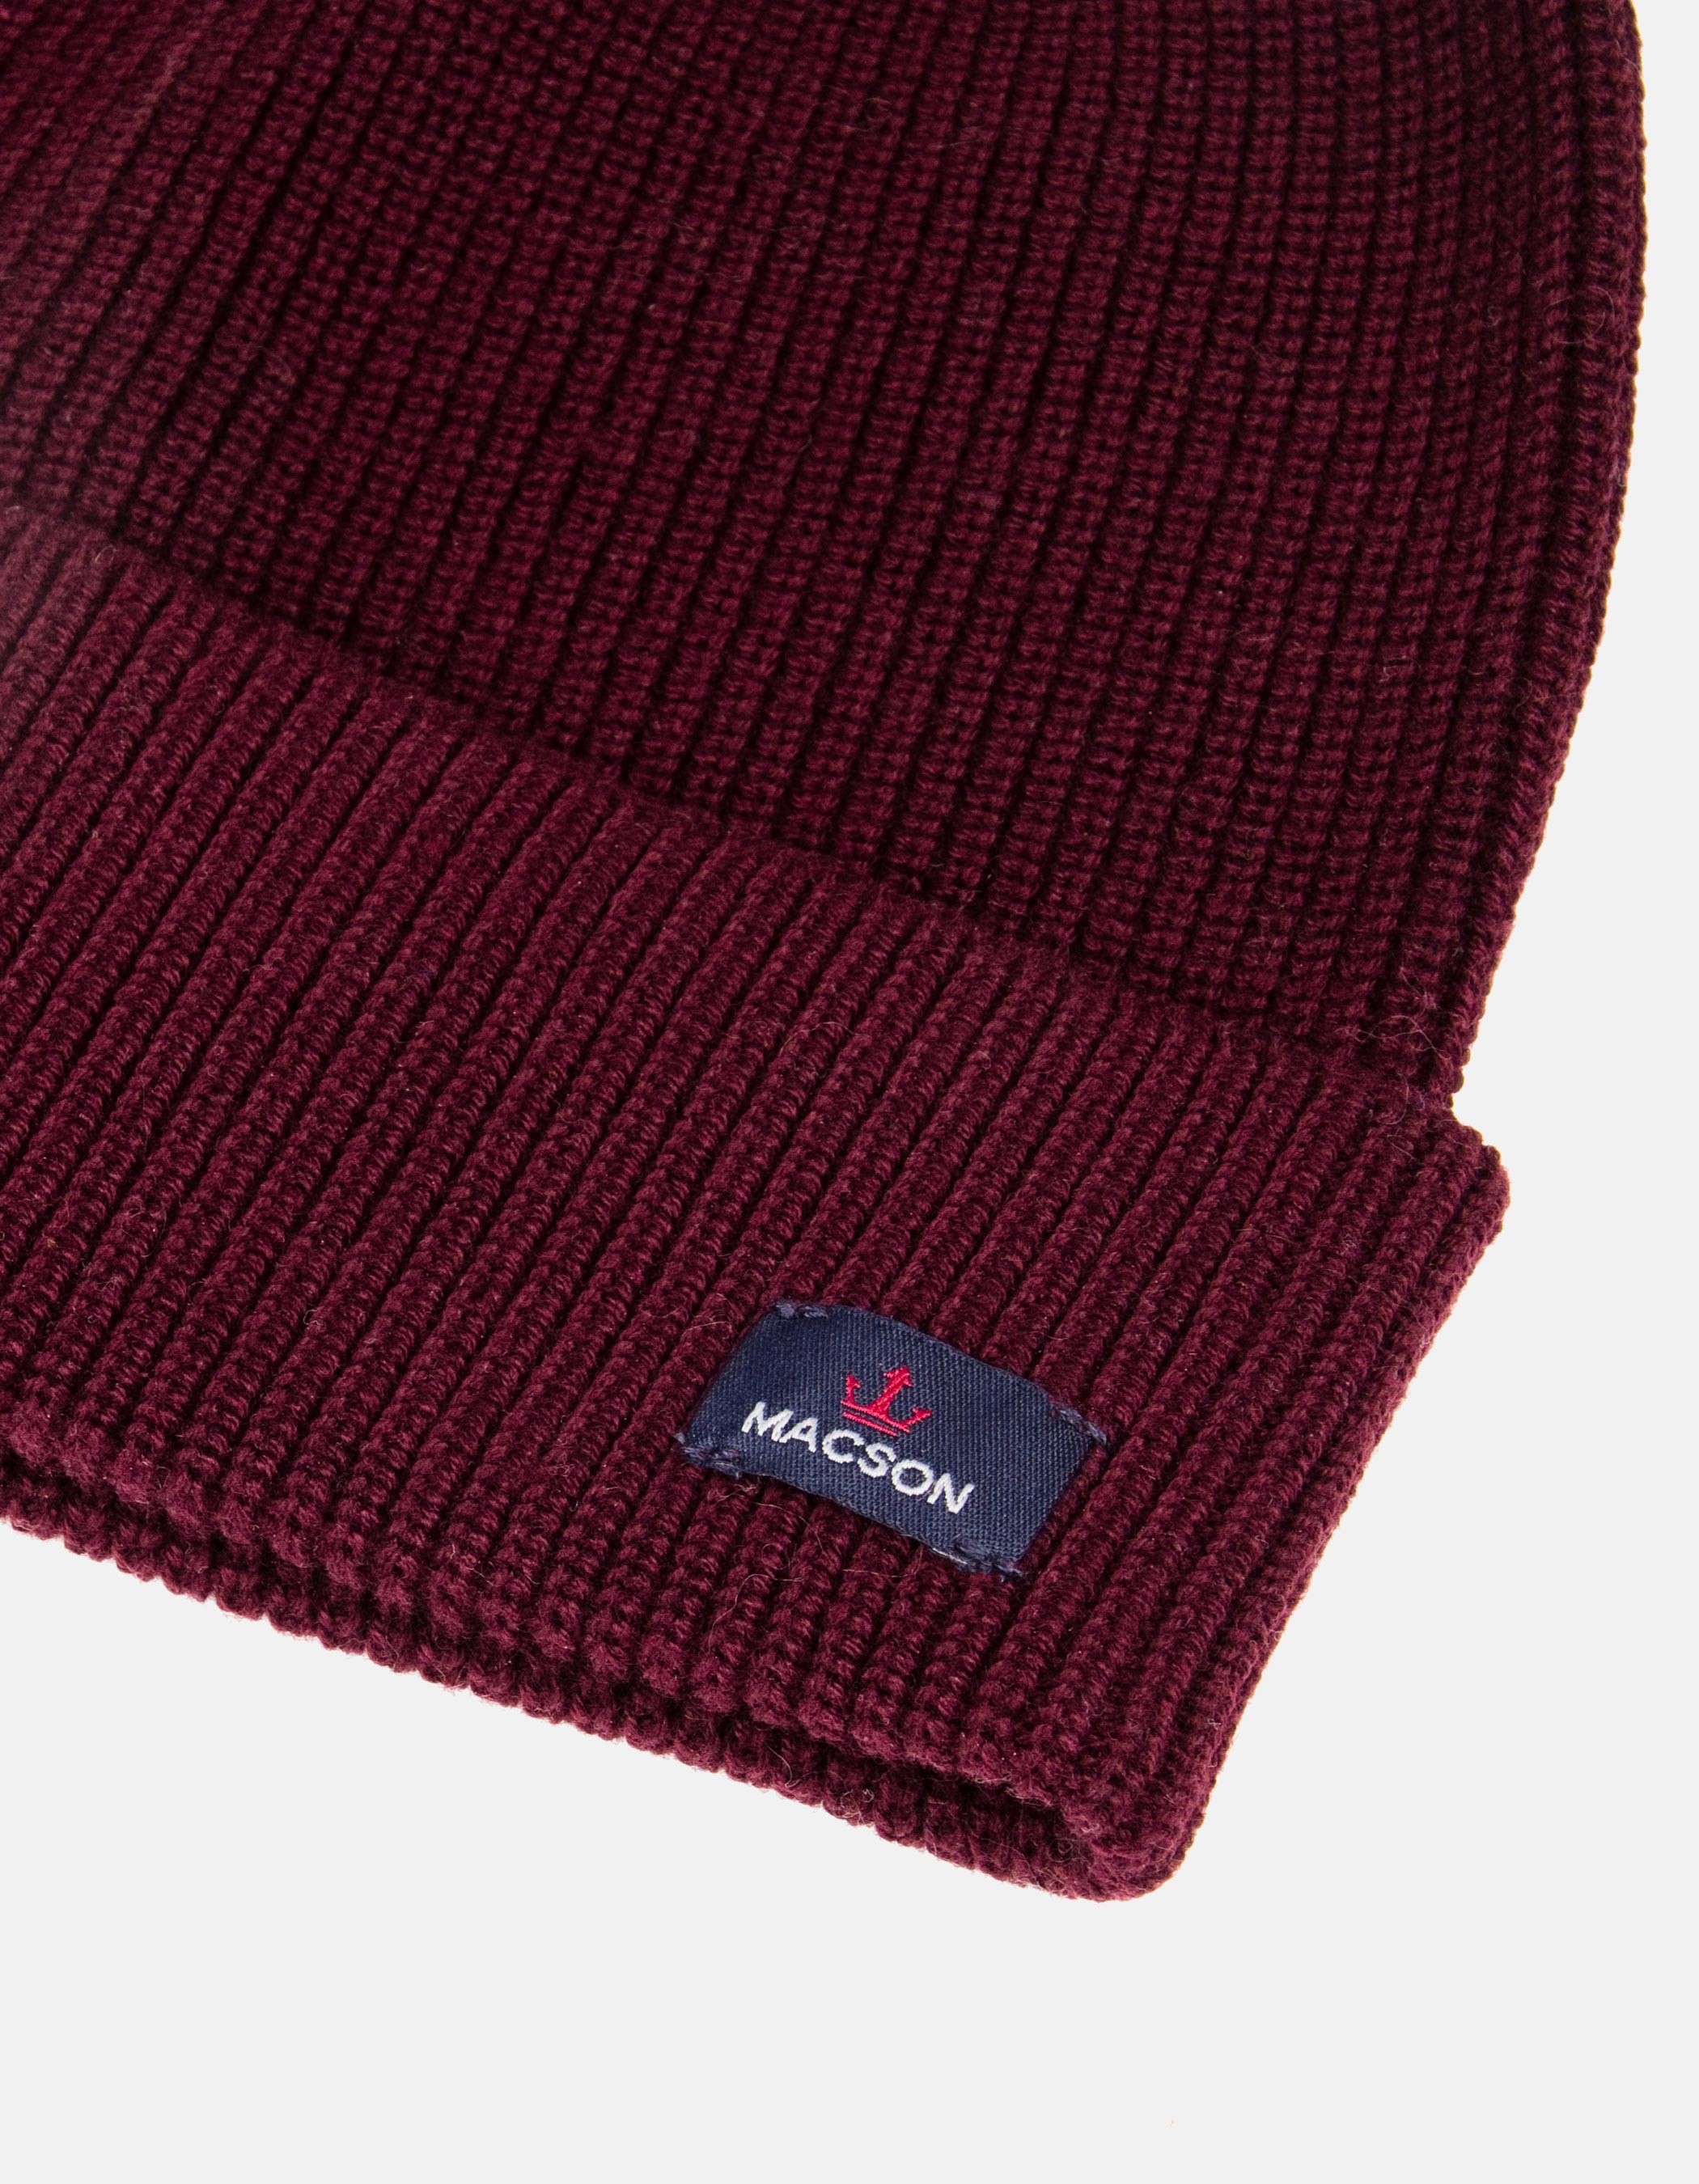 Knitted hat mcs 2